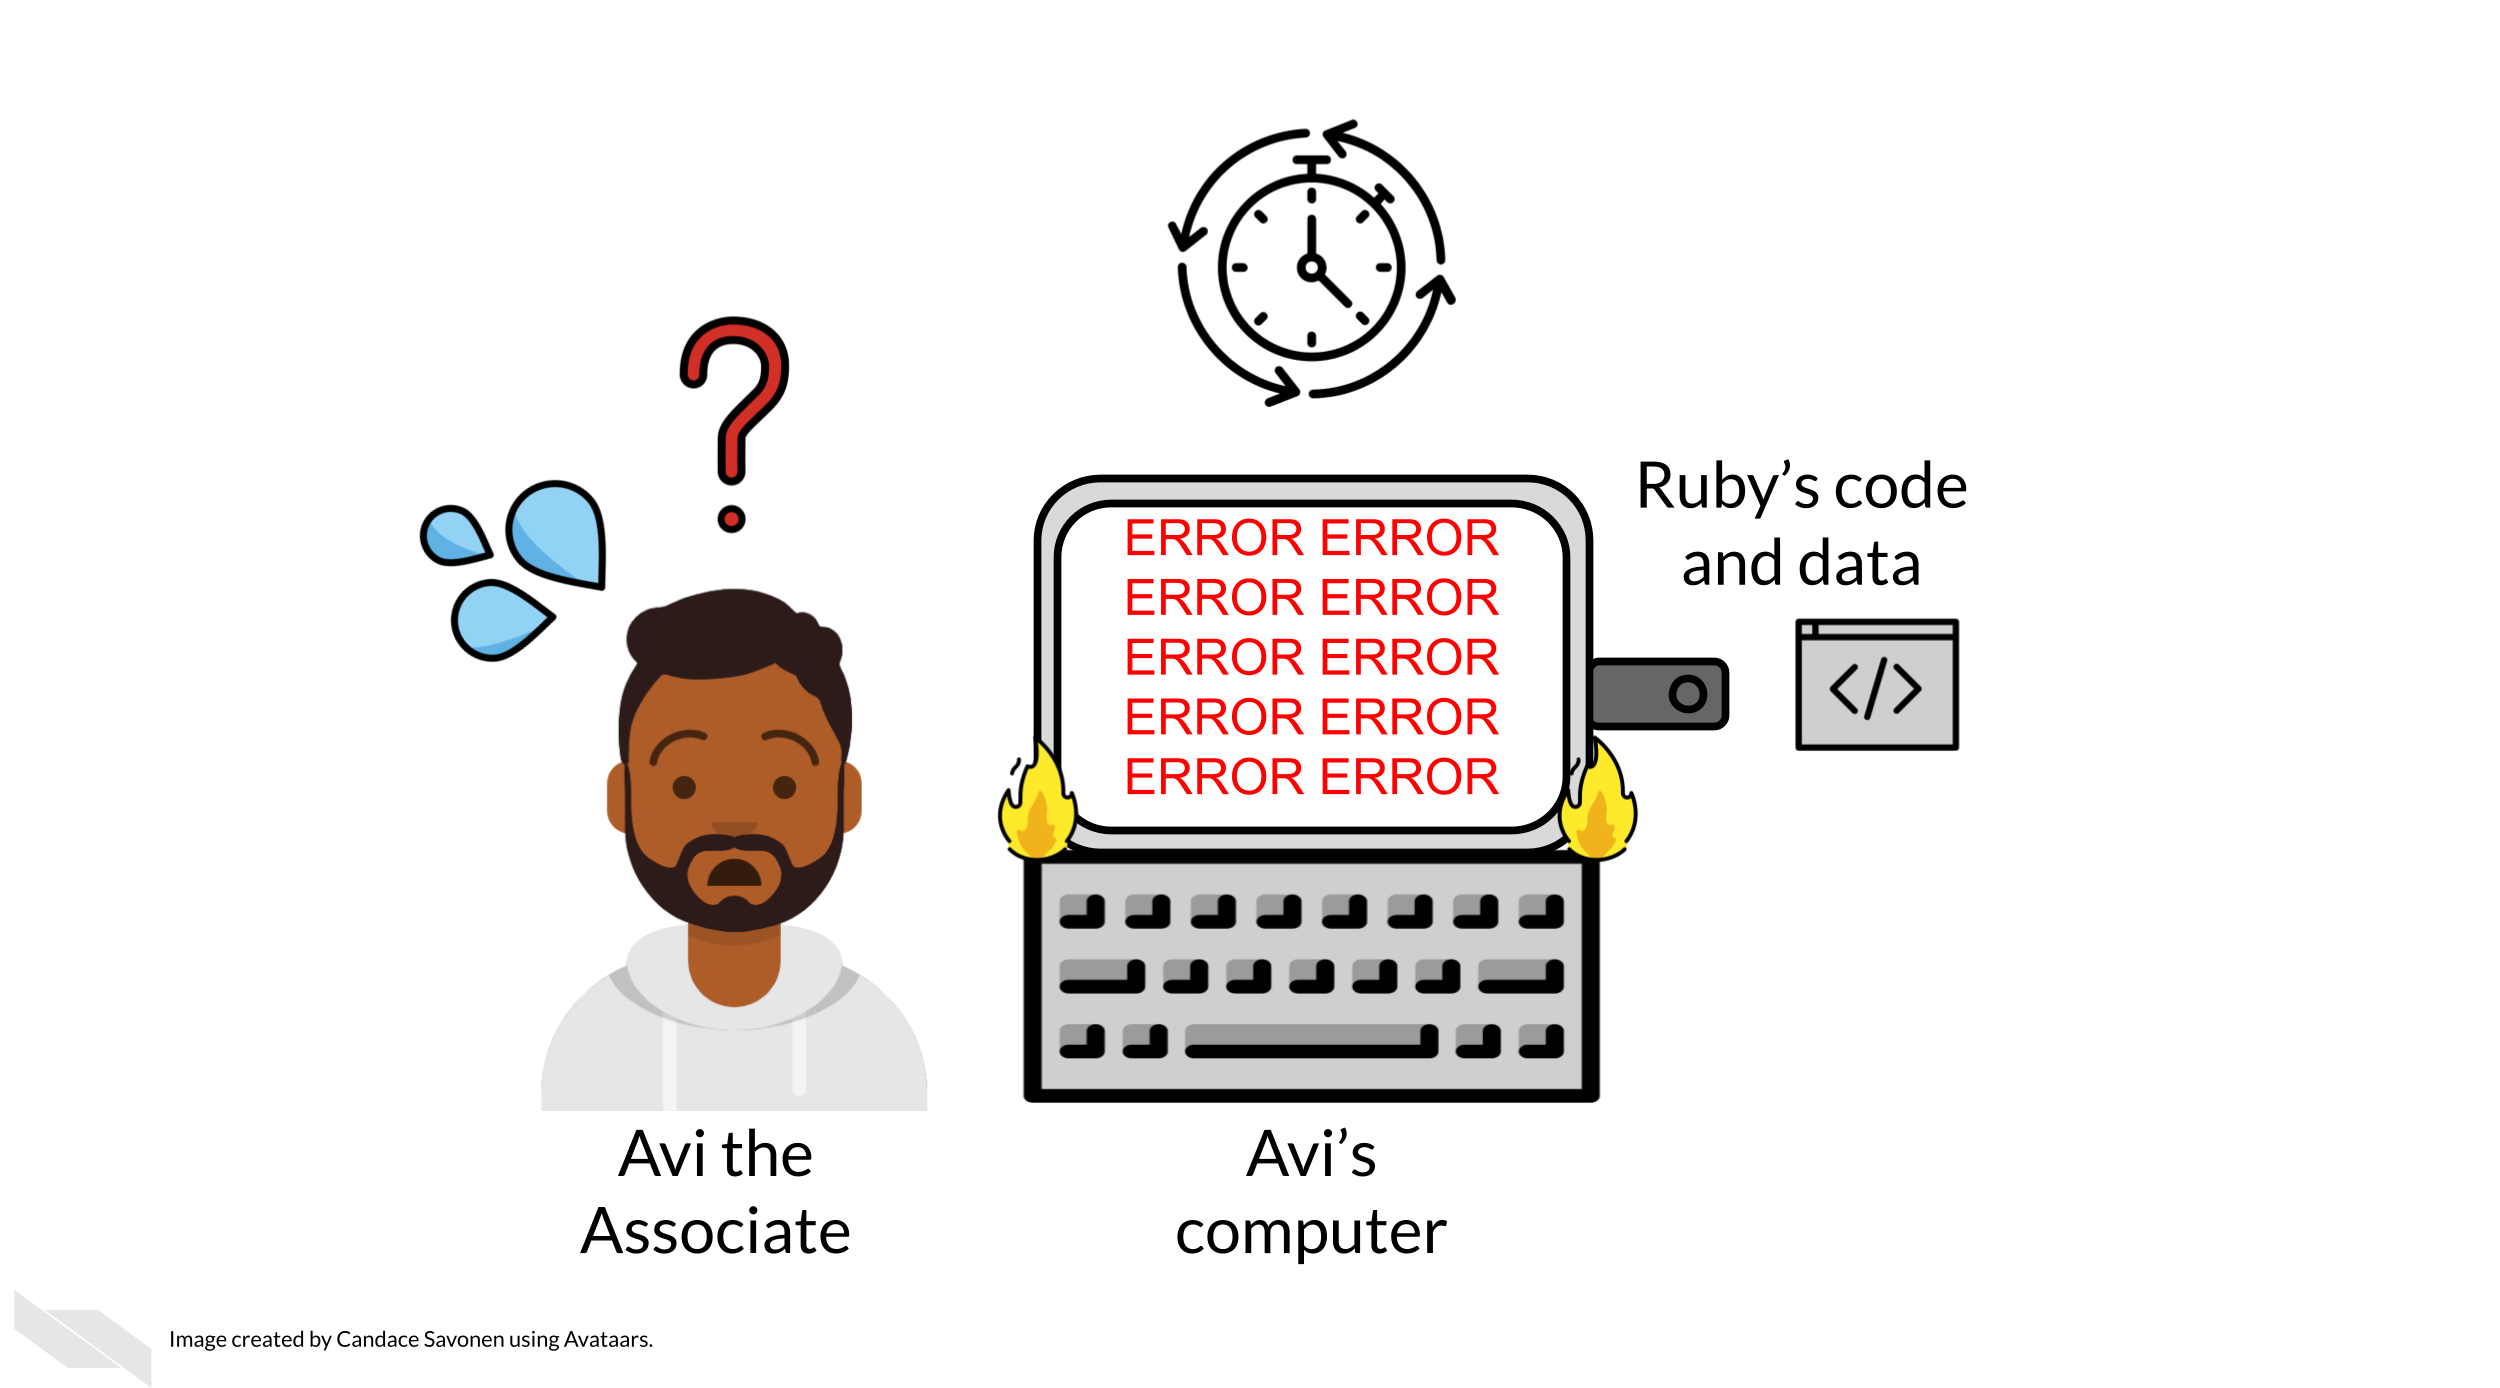 Avi the associate is confused and sweating. His computer has the word ‘error’ written all over it and its on fire trying to use Ruby’s code on Ruby’s data. This is using a substantial amount of time and effort on Avi’s part. 